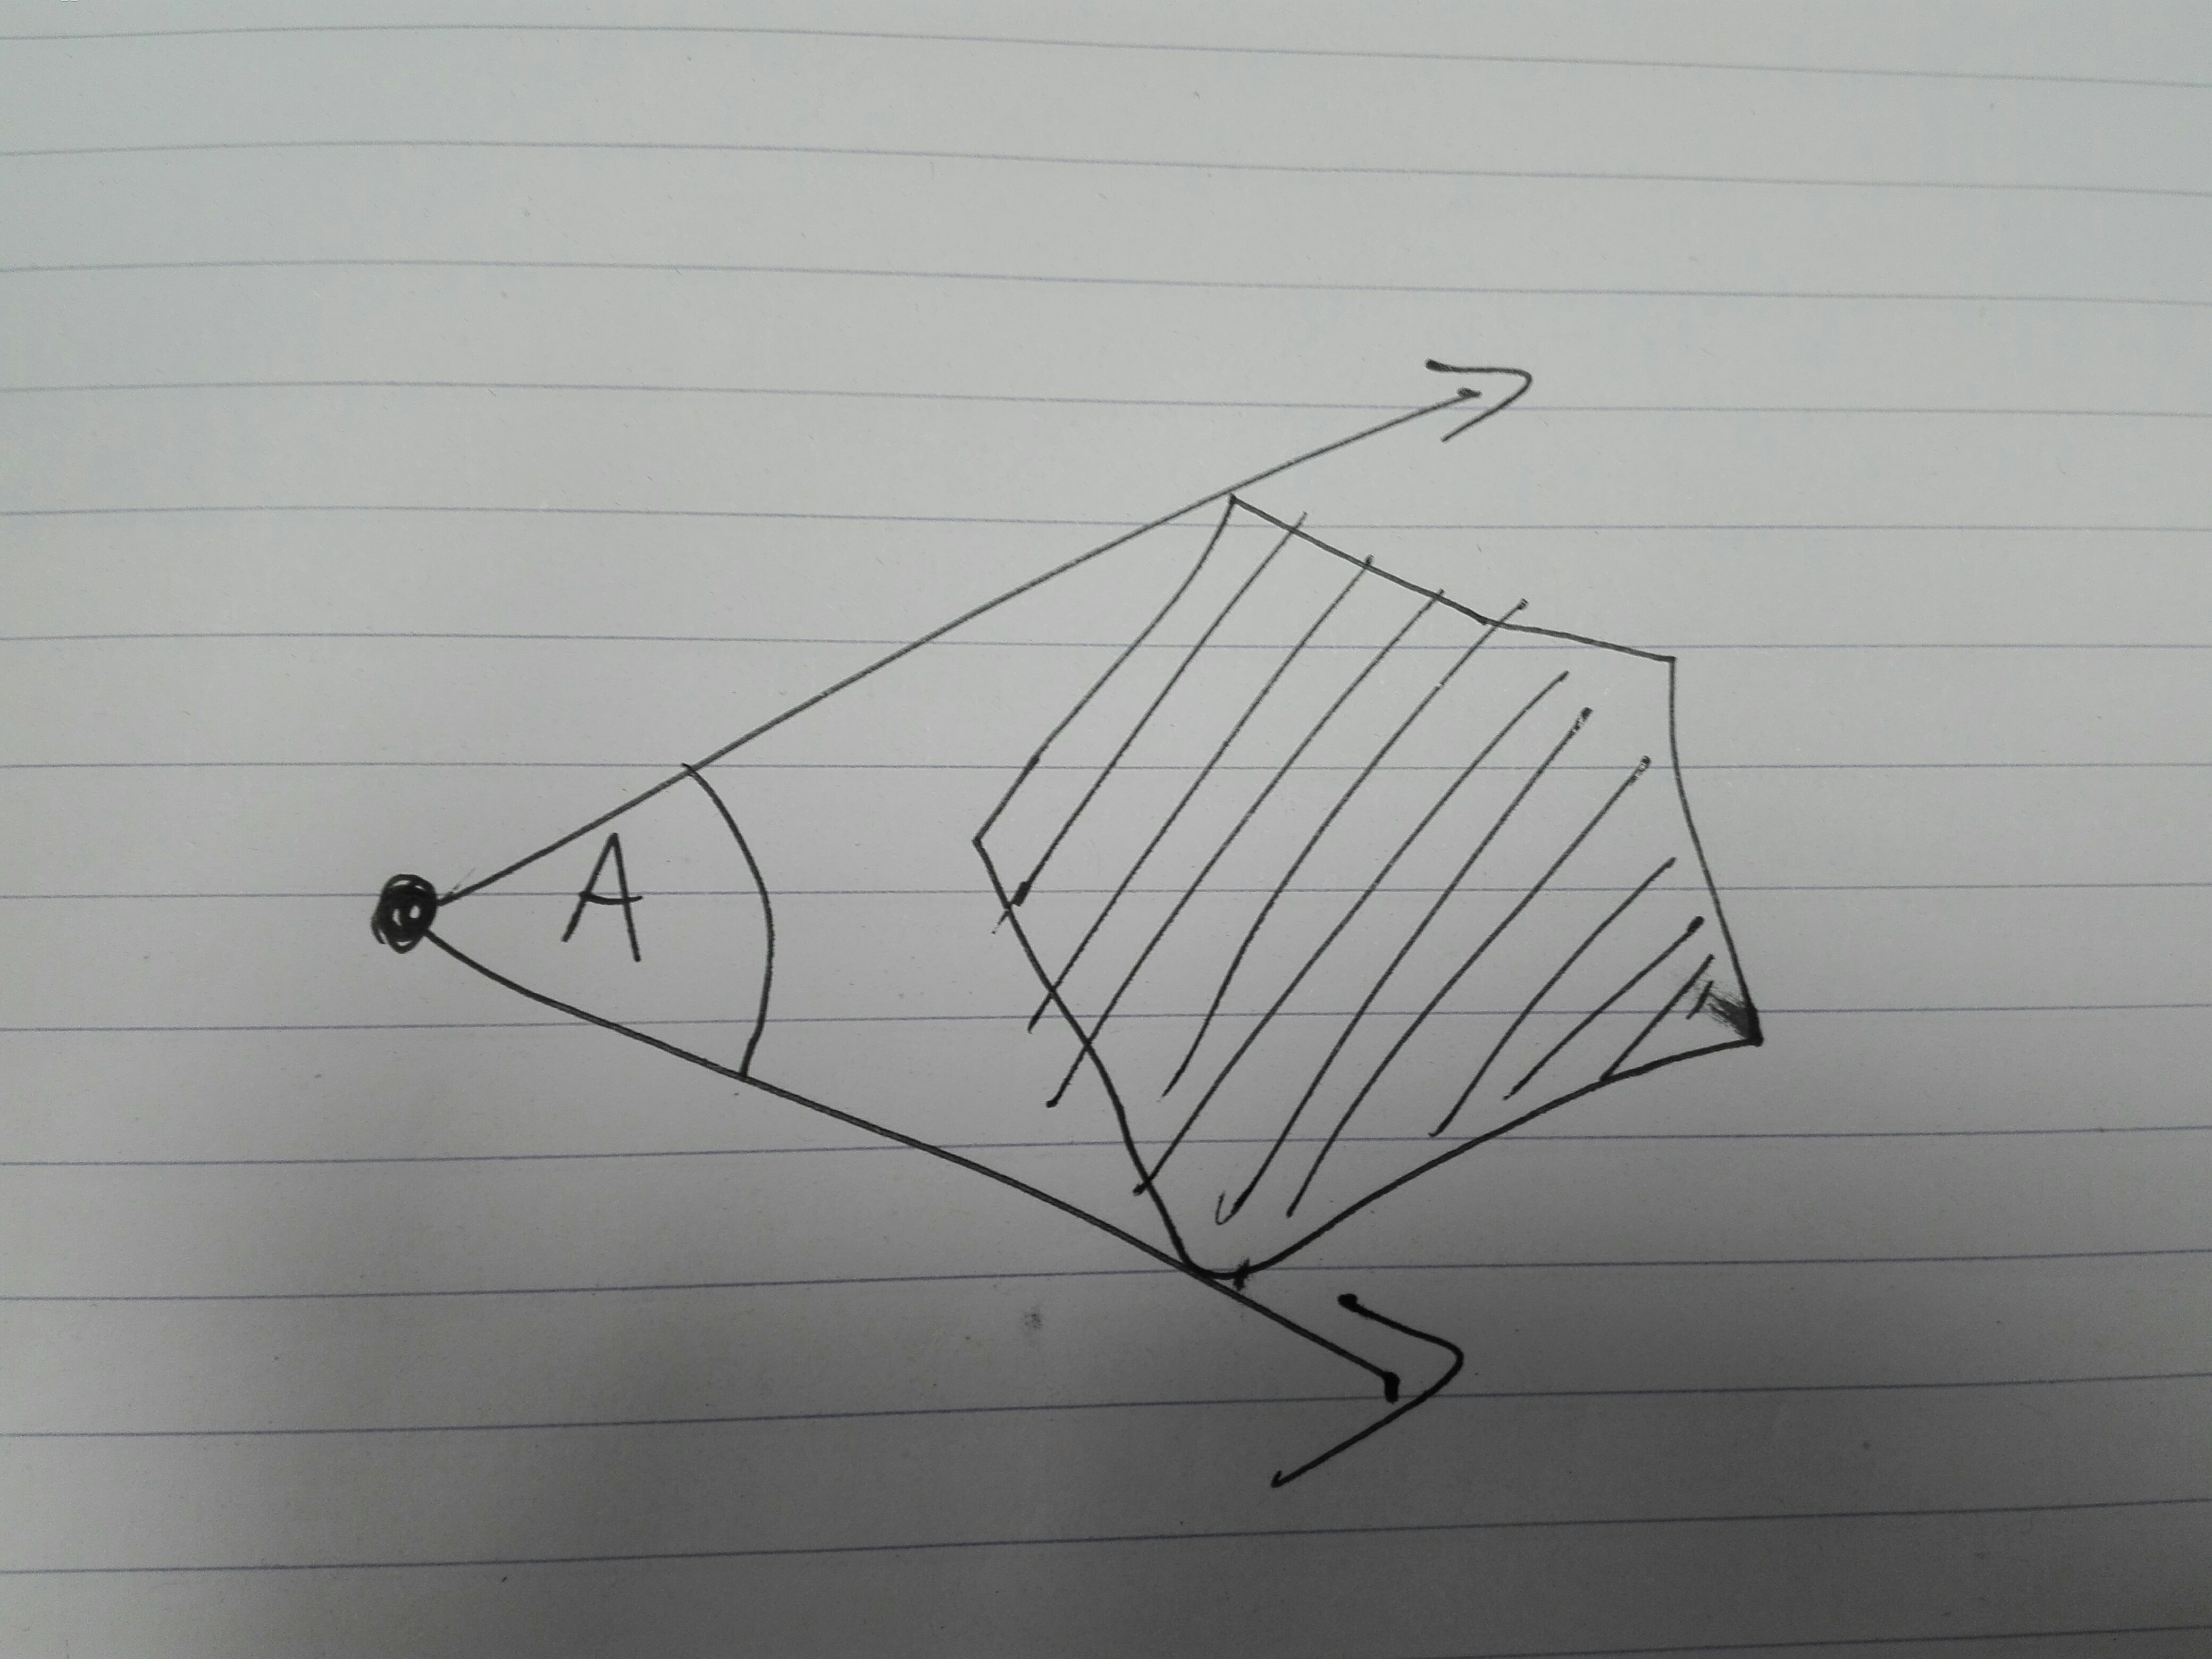 Included Angle of polygon from point data